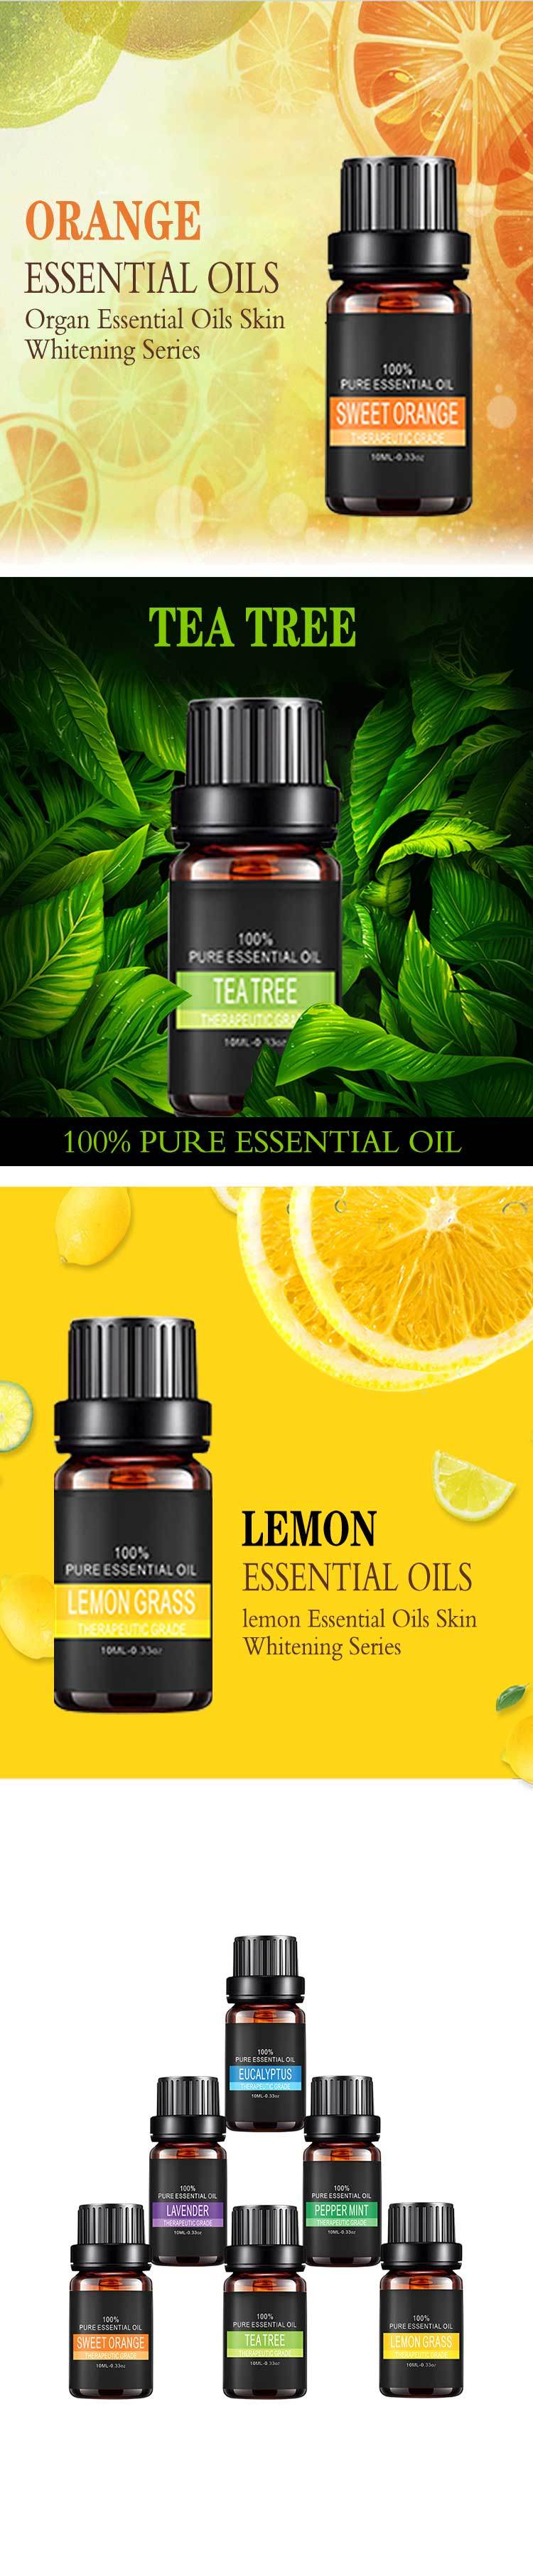 No Chemical Composition for 100% Pure Essential Oil